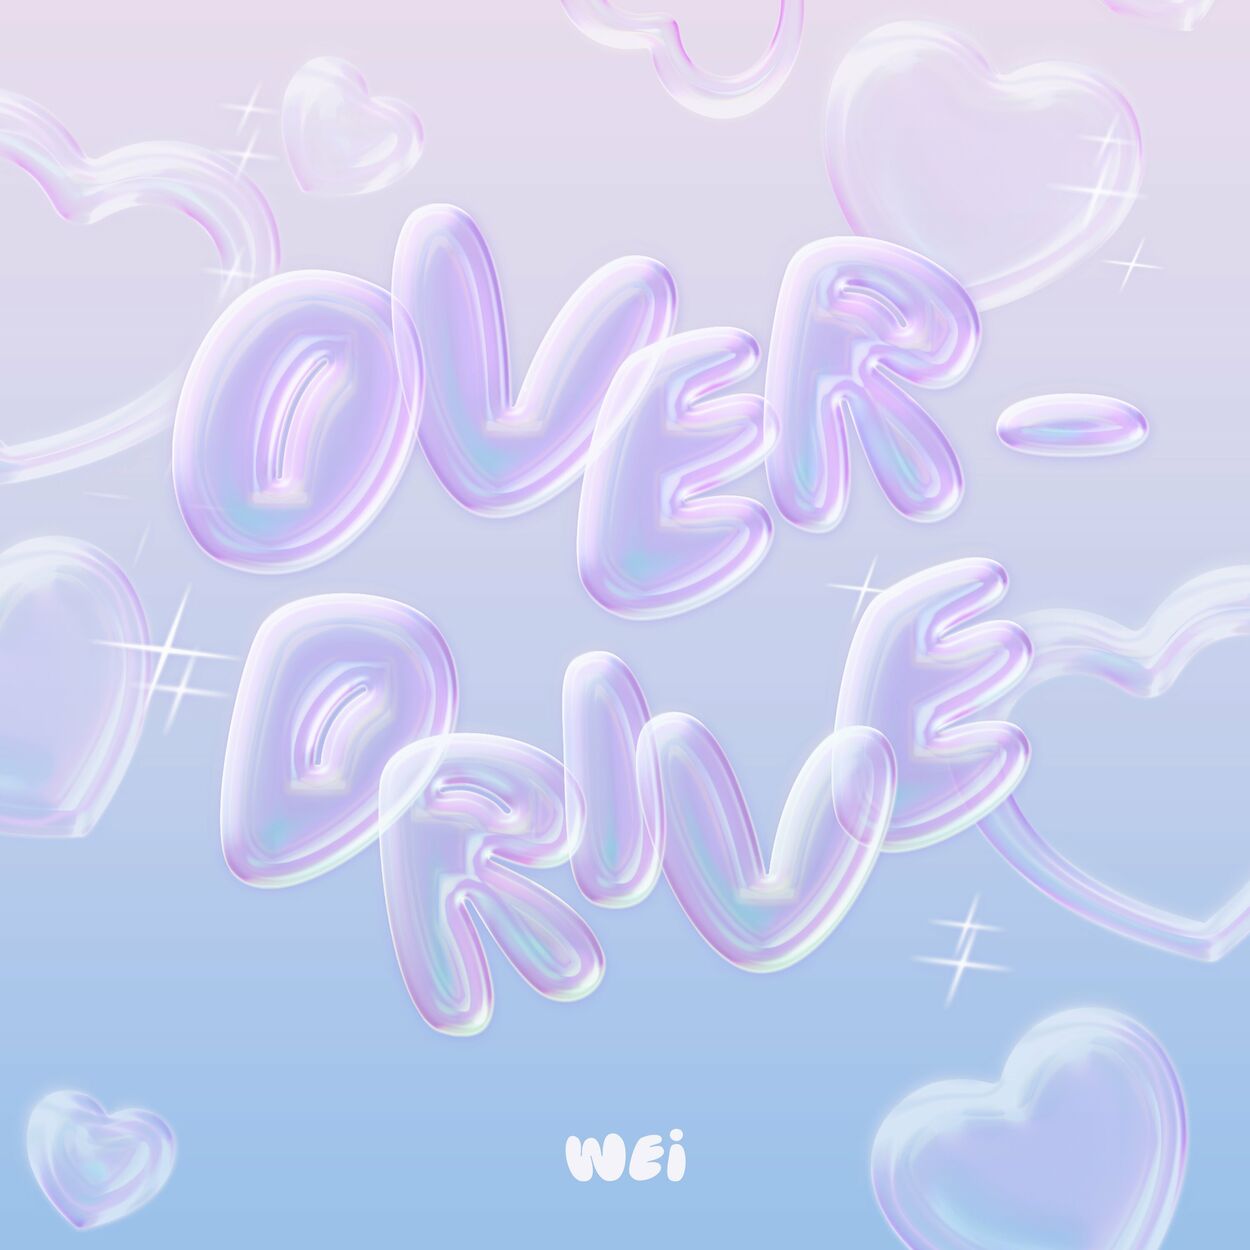 Wei – OVERDRIVE (English Ver.) – Single